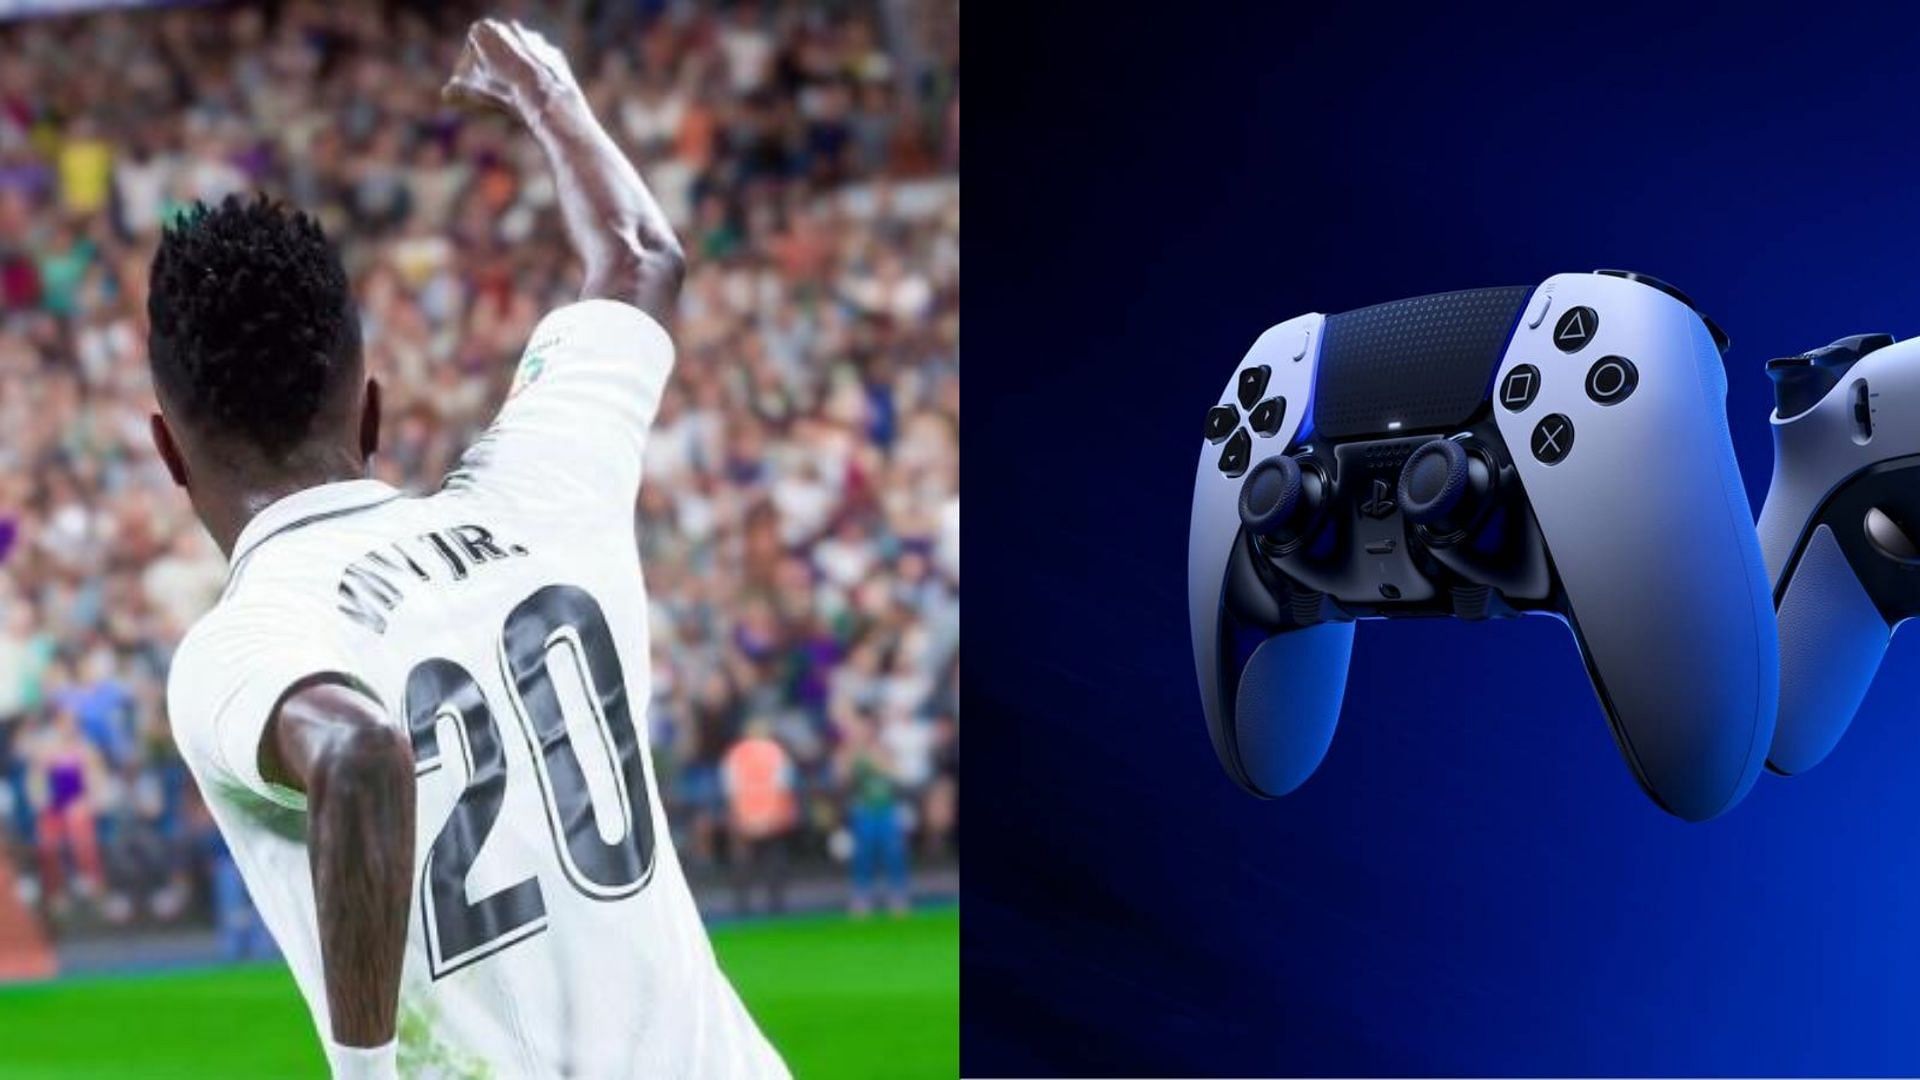 Ps4 Pro + One Controller + FIFA 24, in Wuse 2 - Video Game